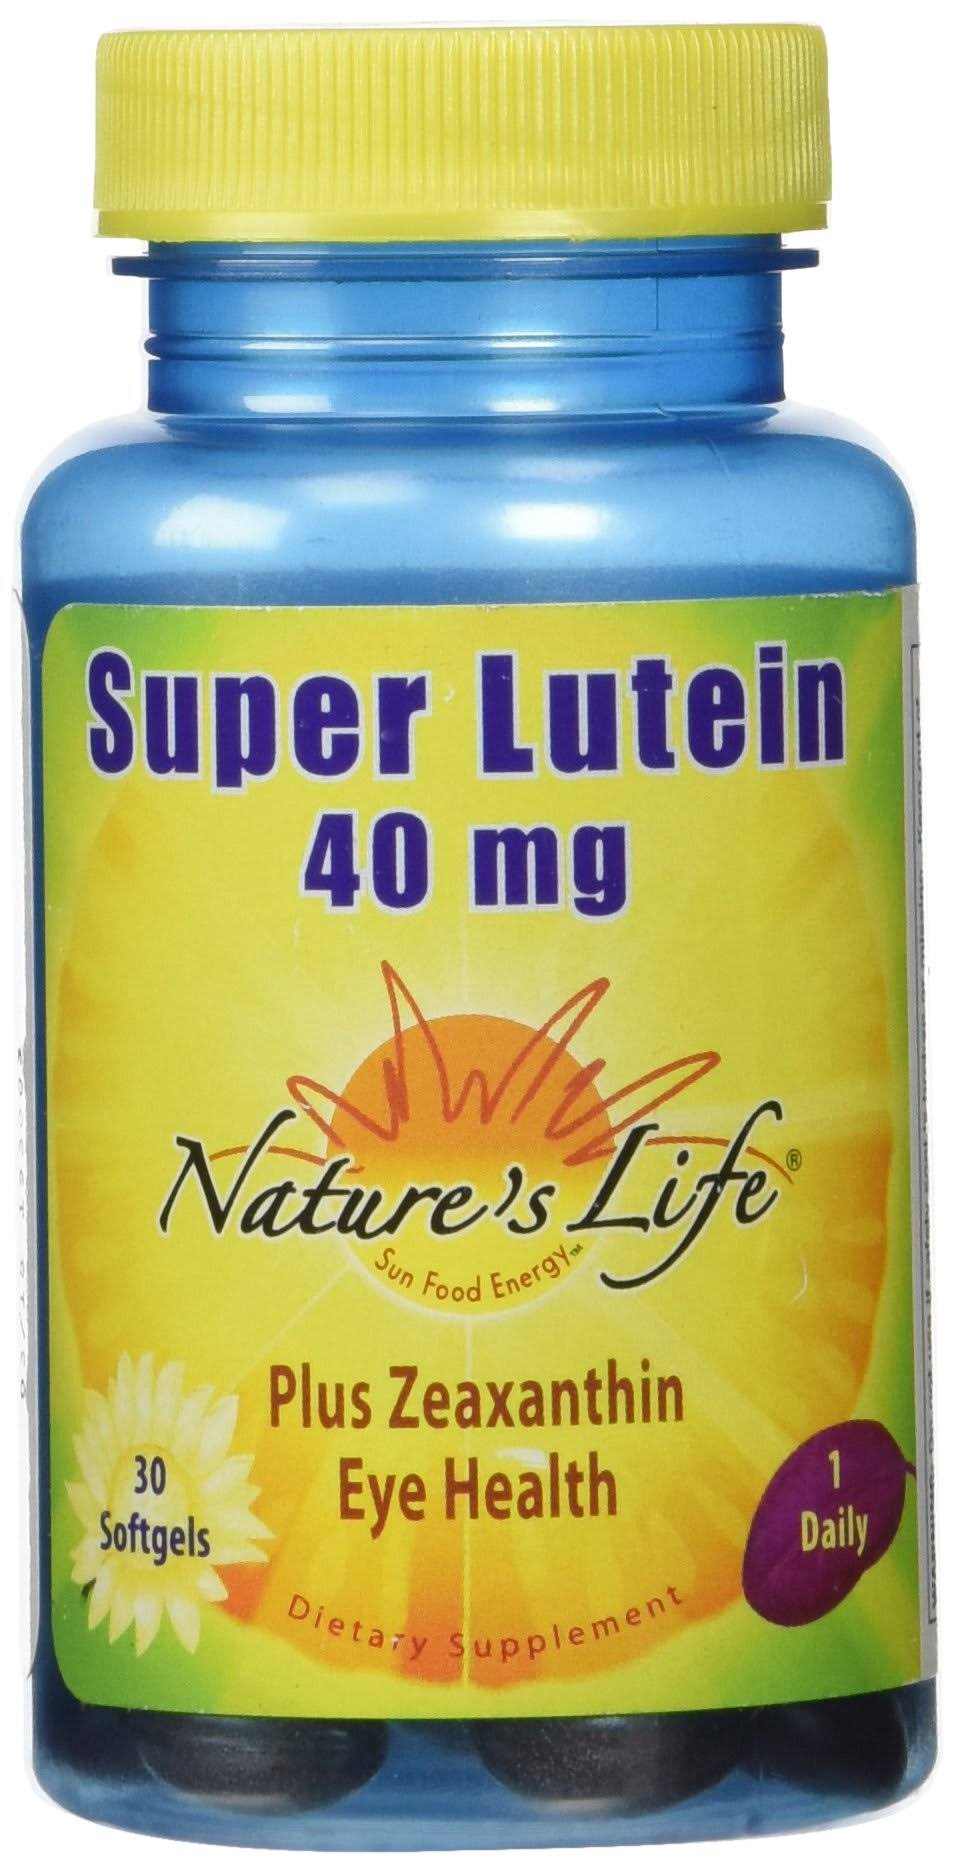 Nature's Life Super Lutein Supplement - 40mg, 30 Softgels